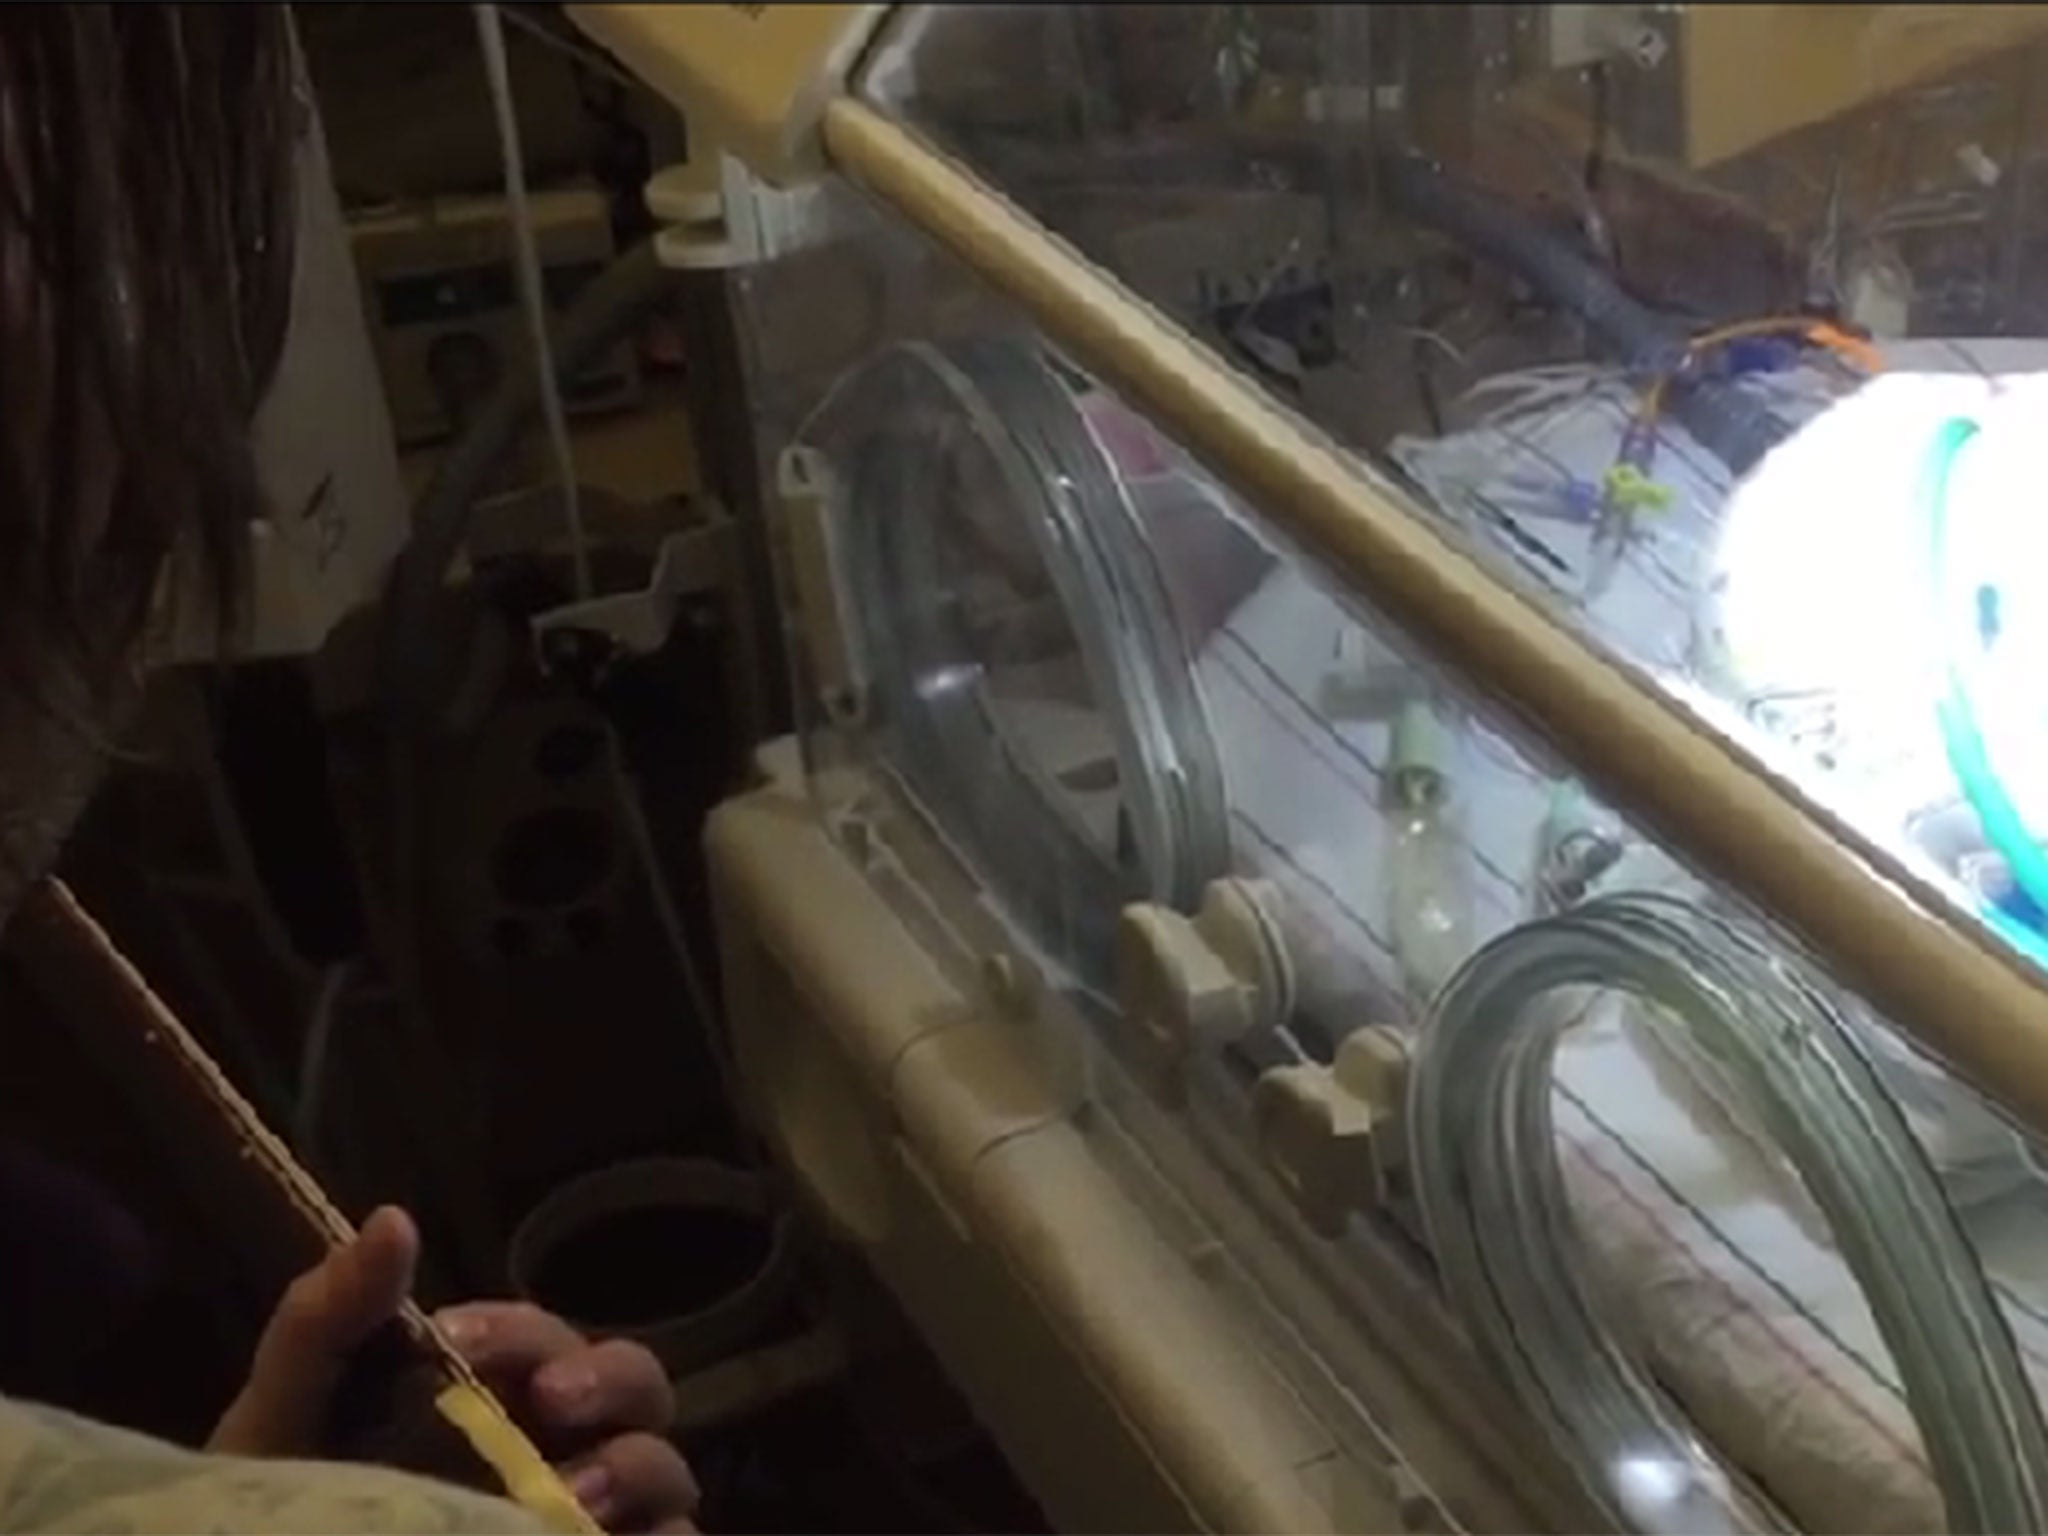 Chris Picco performed Paul McCartney's Blackbird as his son lay in the incubator